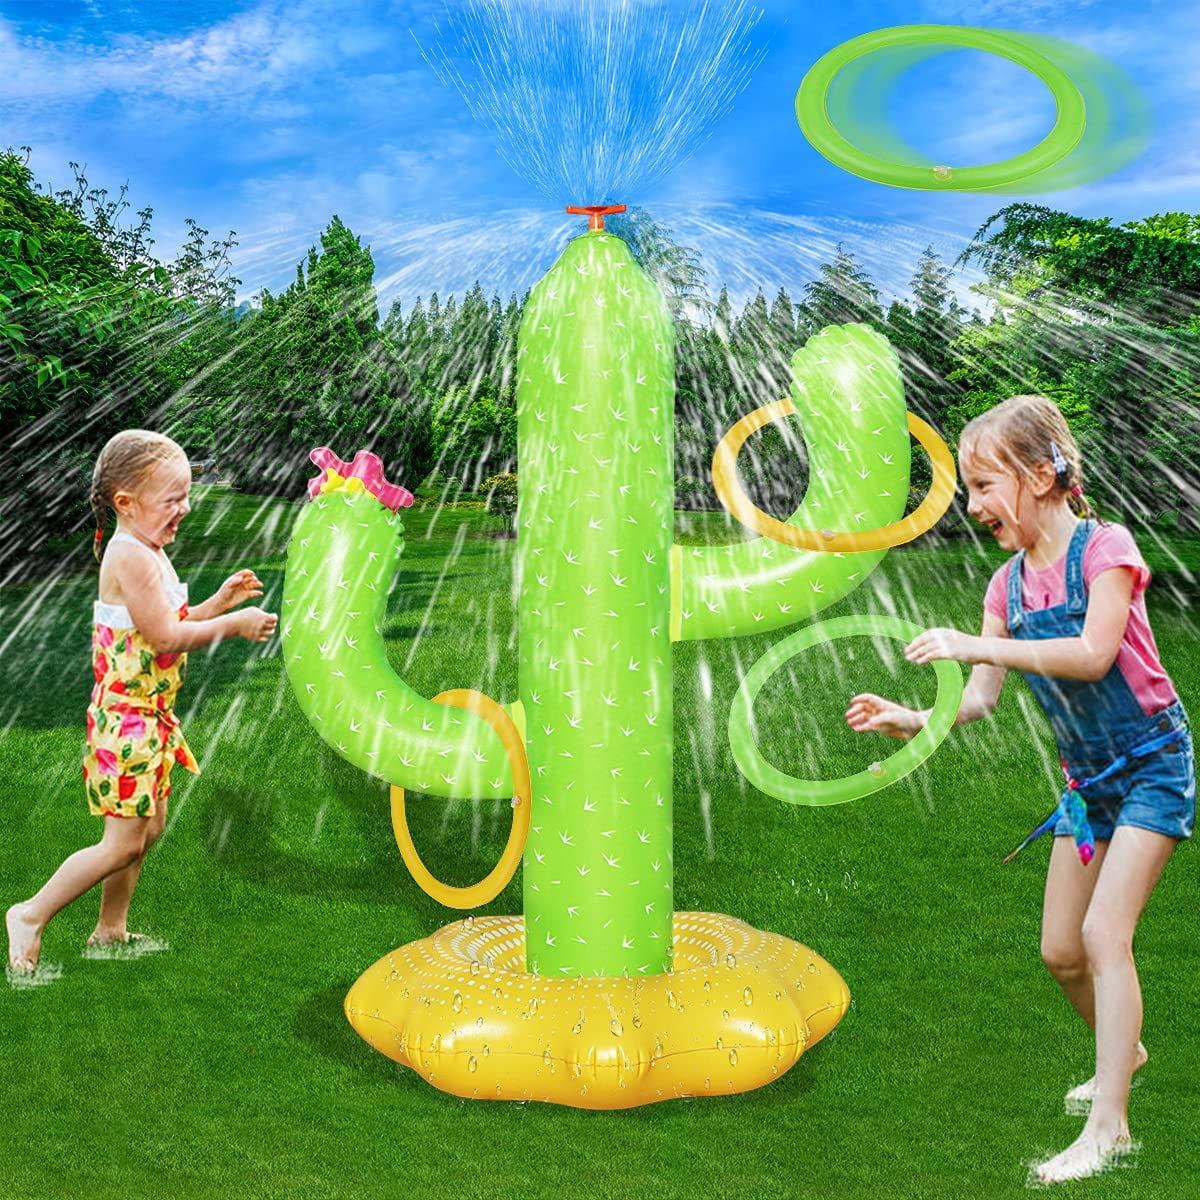 Gifts and for Toy 4 5 Spray Fun Inflatable Children Cactus 4 Rings, Boys with Years Water Toys Ages U Summer 6 Water Girls, Backyard Cactus Game Sprinkler Outdoor 3 Sprinkler for for Kids,